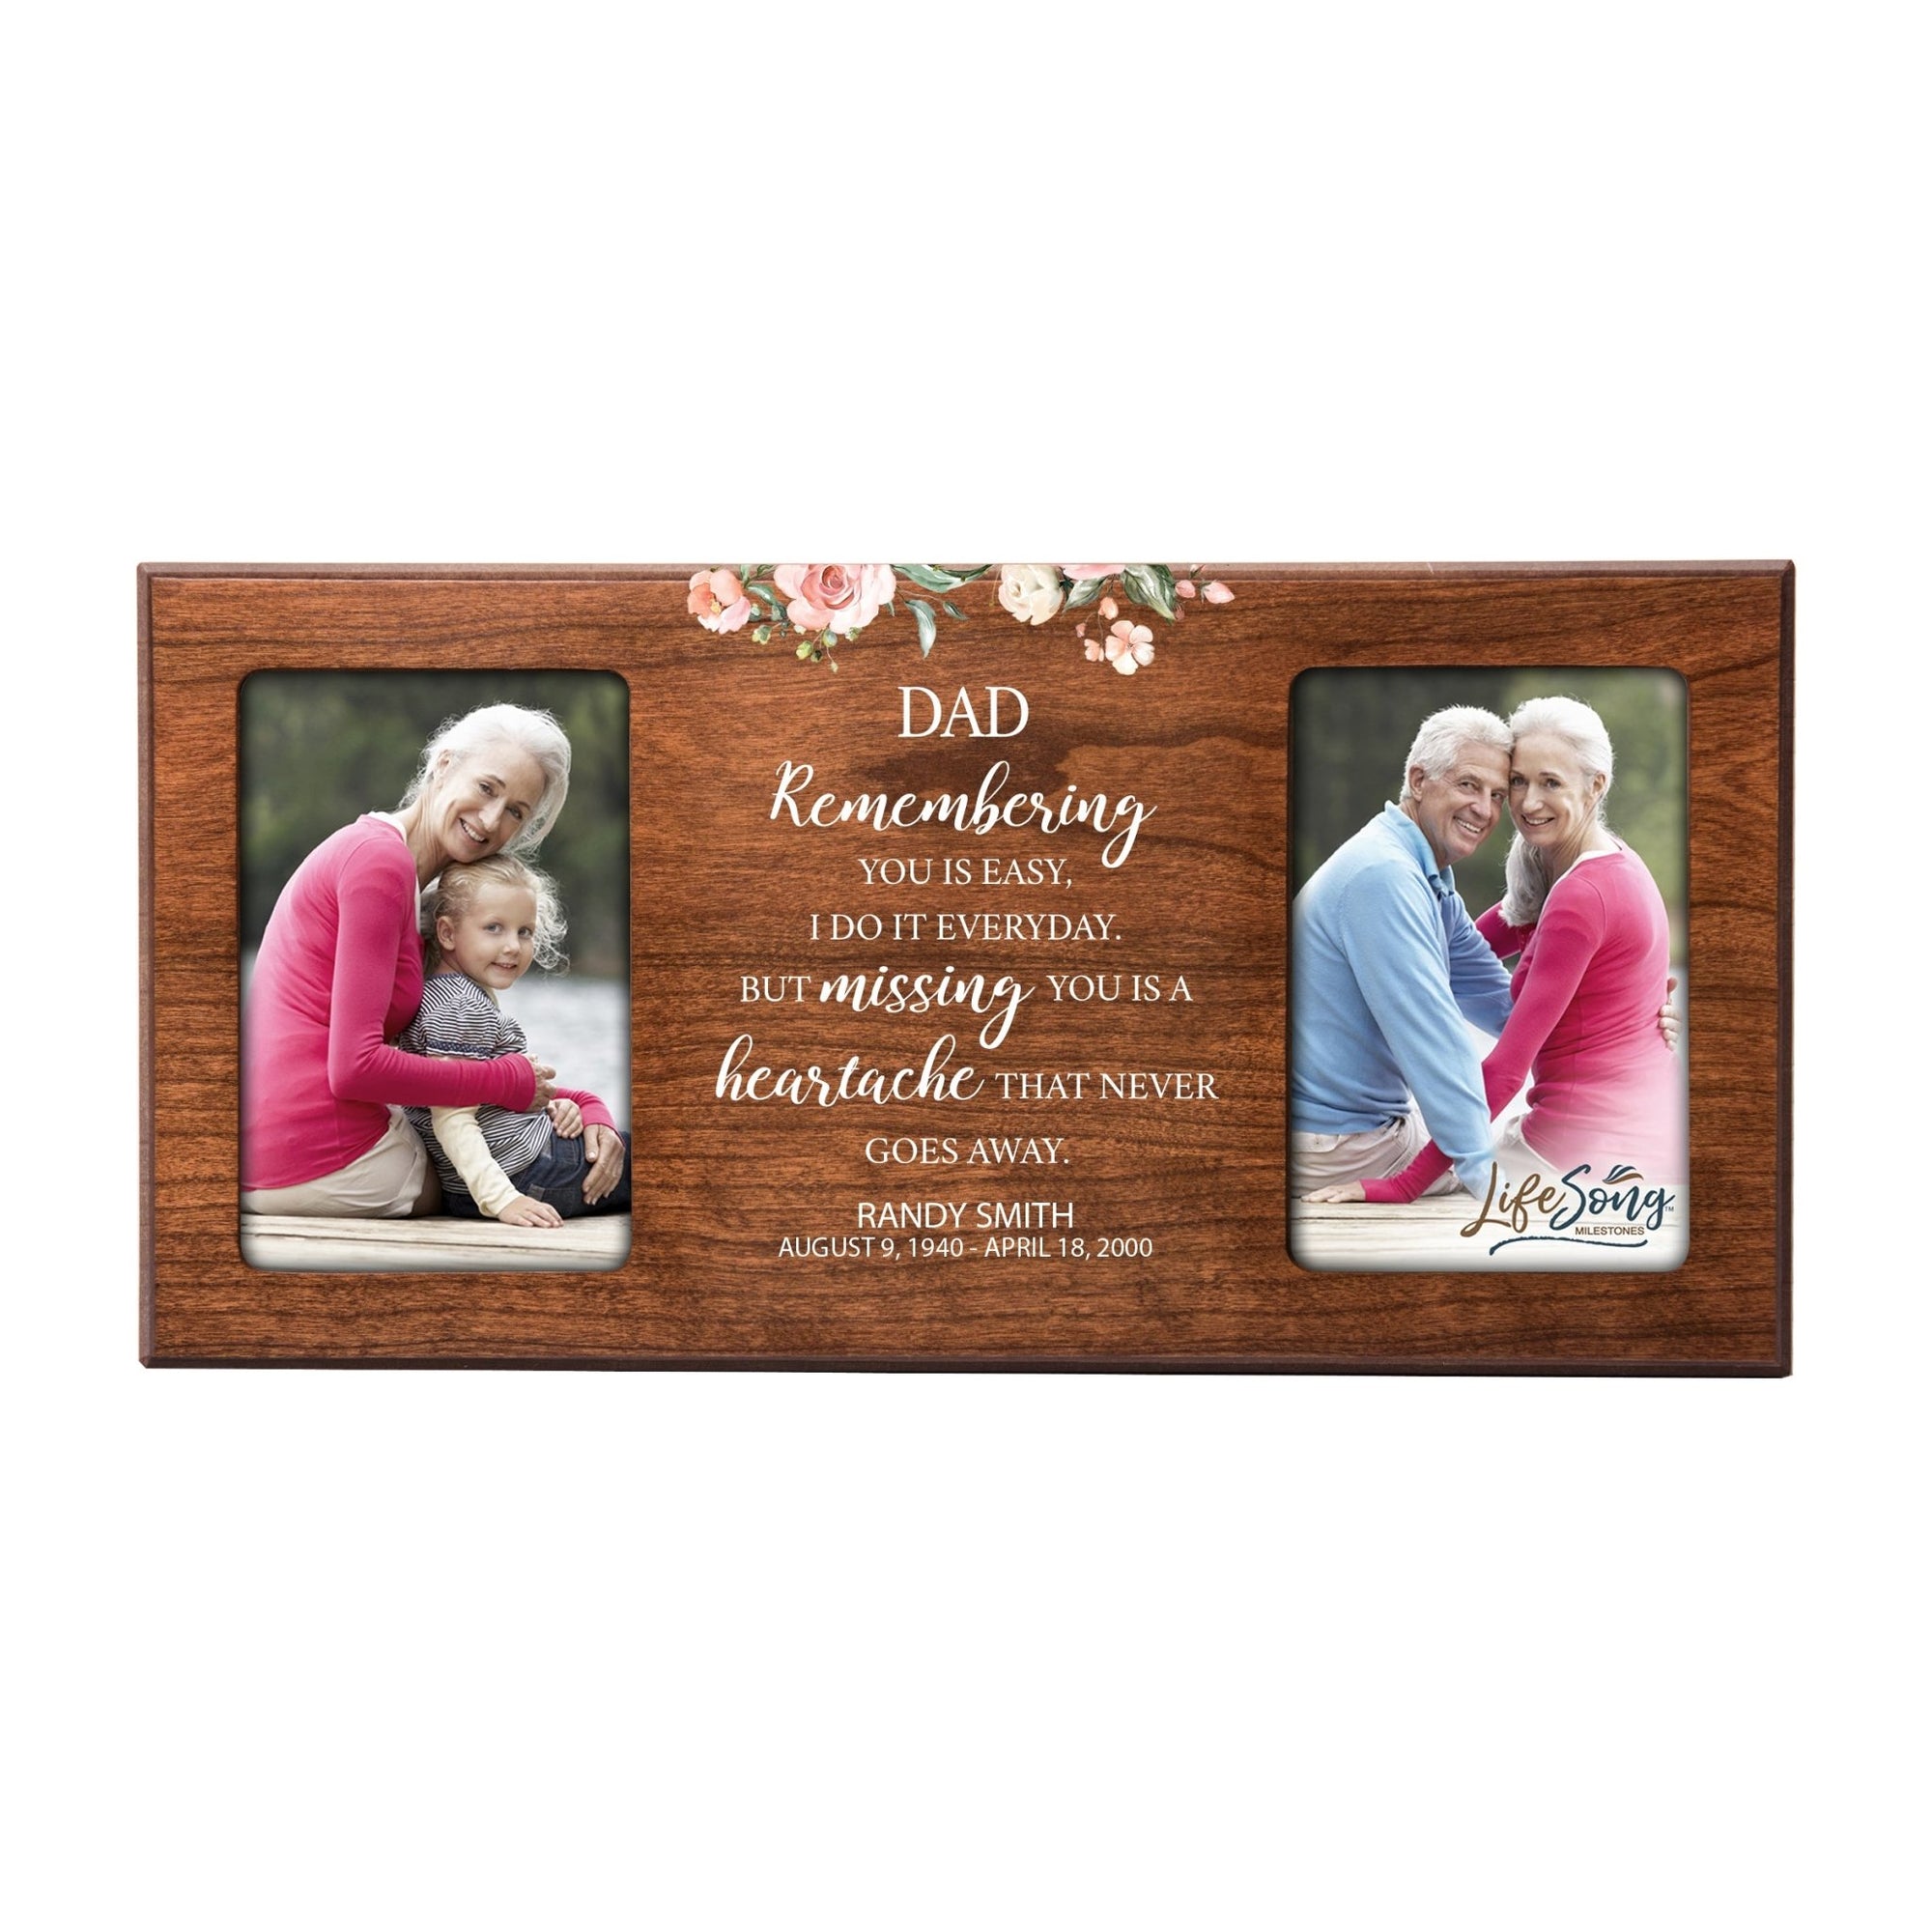 Custom Memorial Picture Frame 16x8in Holds Two 4x6in Photos - Dad, Remembering You Is Easy - LifeSong Milestones